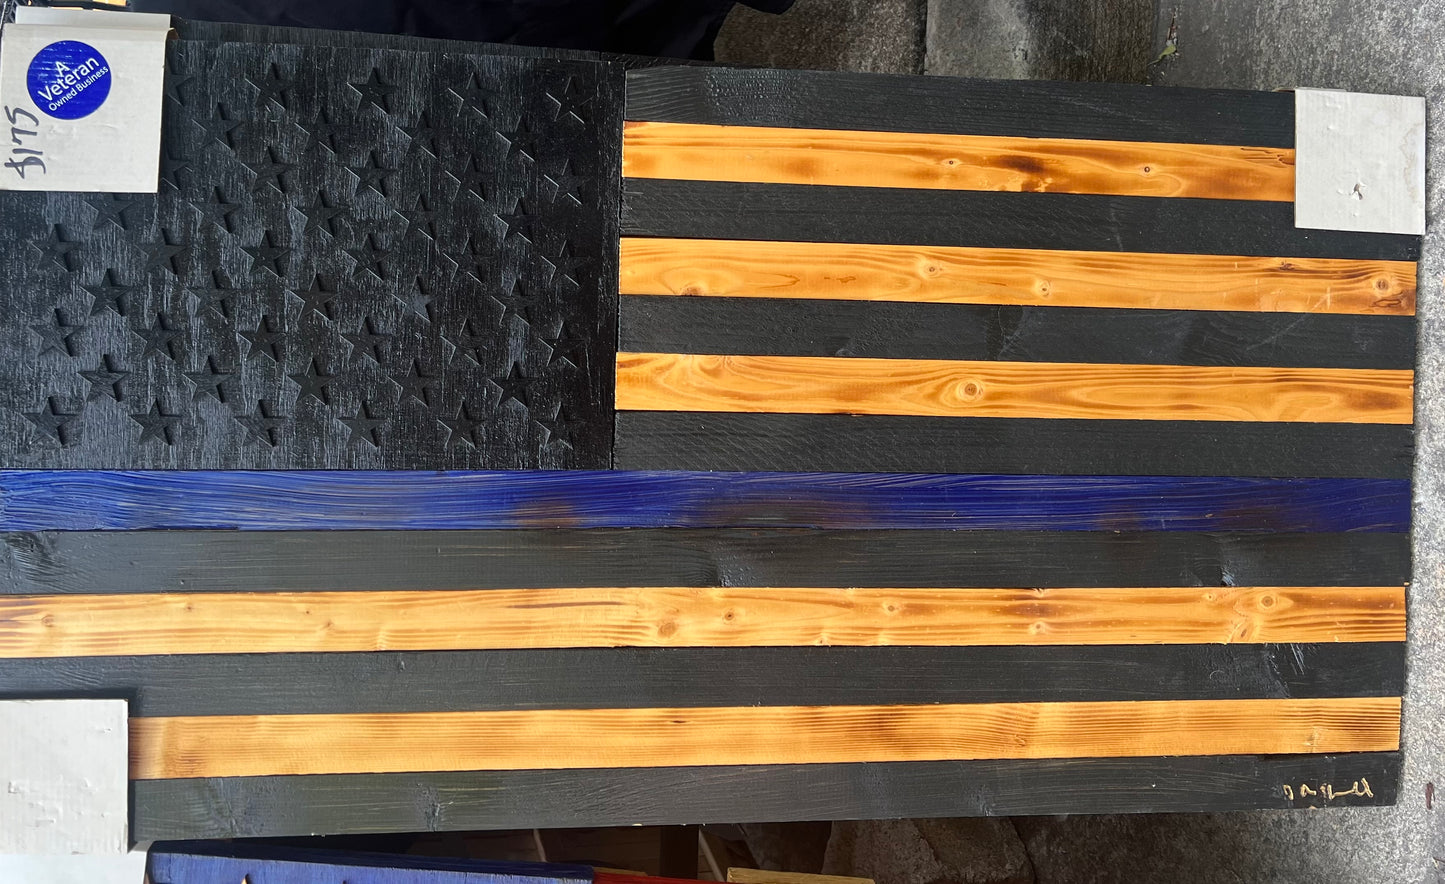 MILITARY & AMERICAN WOODEN FLAGS - 37" X 19"